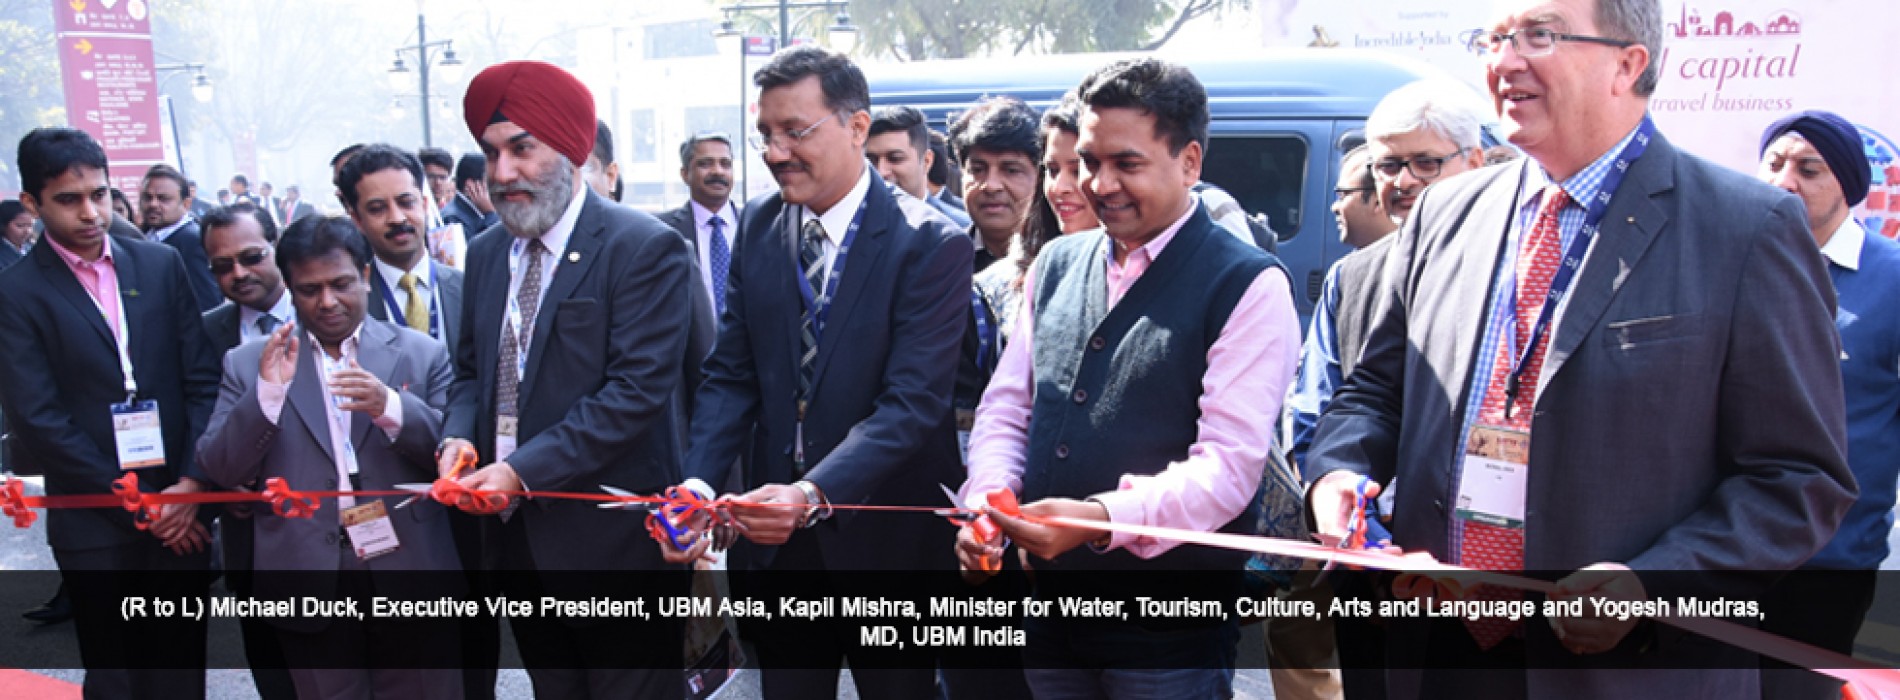 UBM India’s SATTE entered its 24th year in the Capital with difference